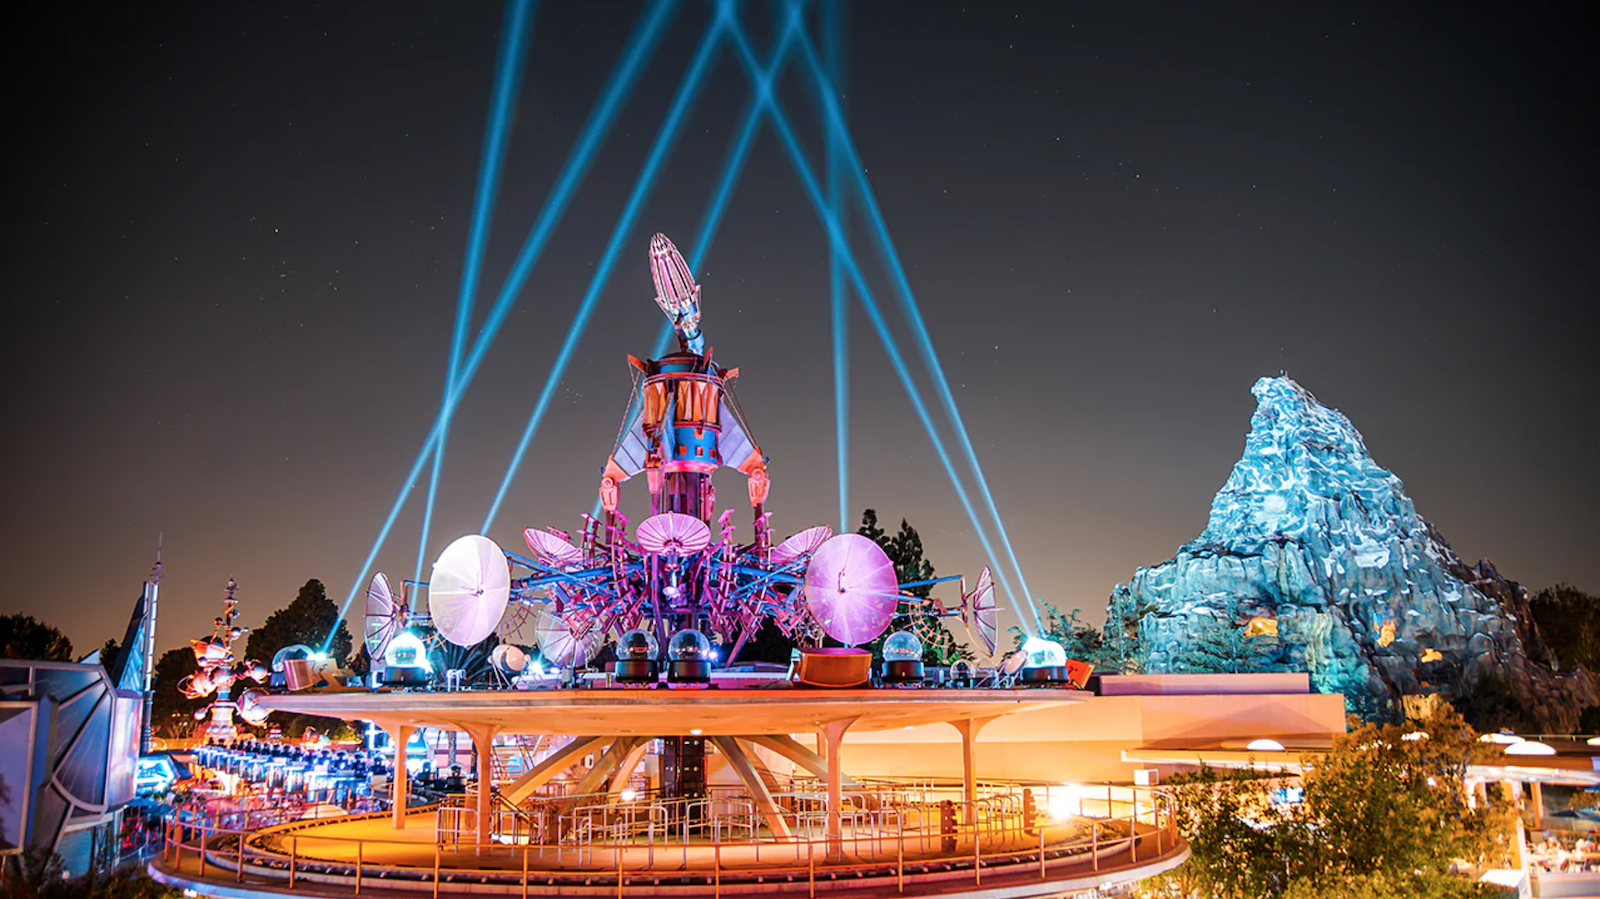 Tomorrowland skyline, featuring the retired Rocket Rods.